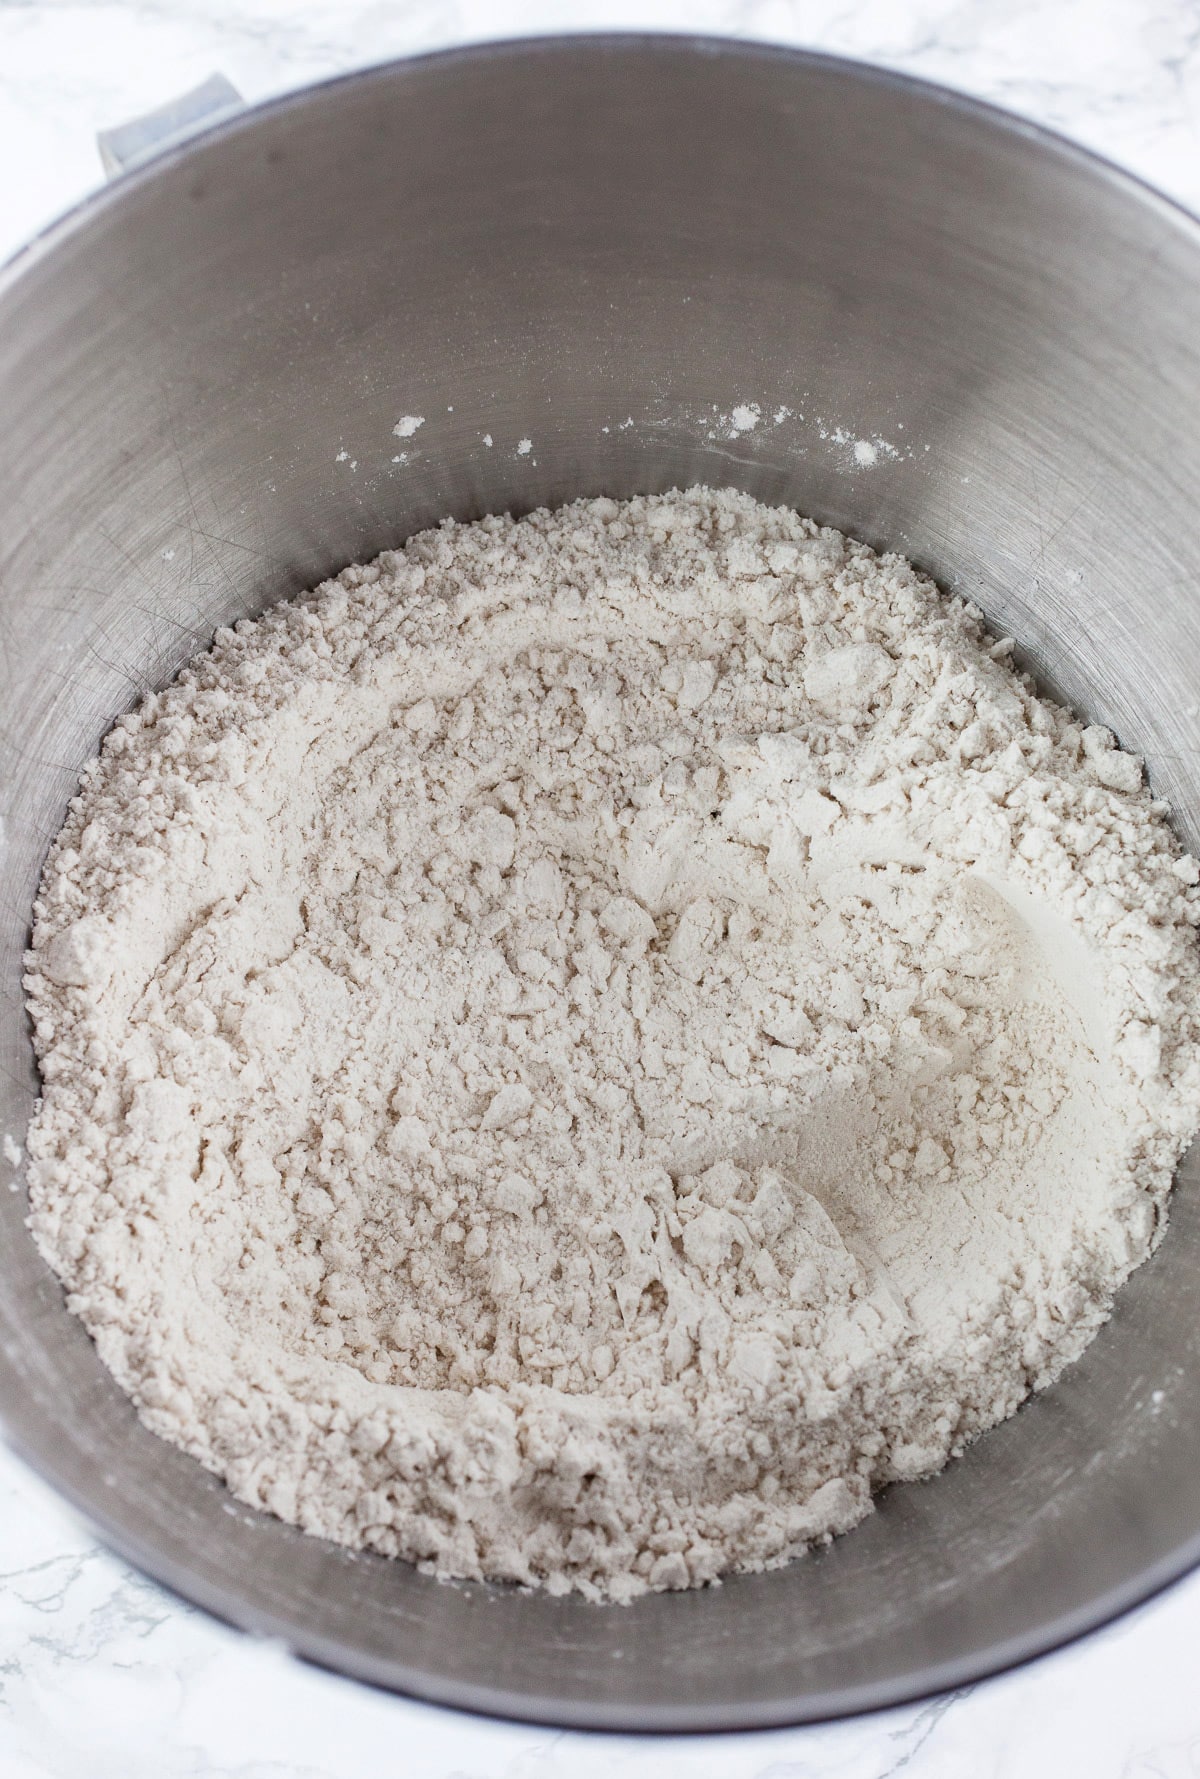 Dry ingredients in stand mixer bowl.